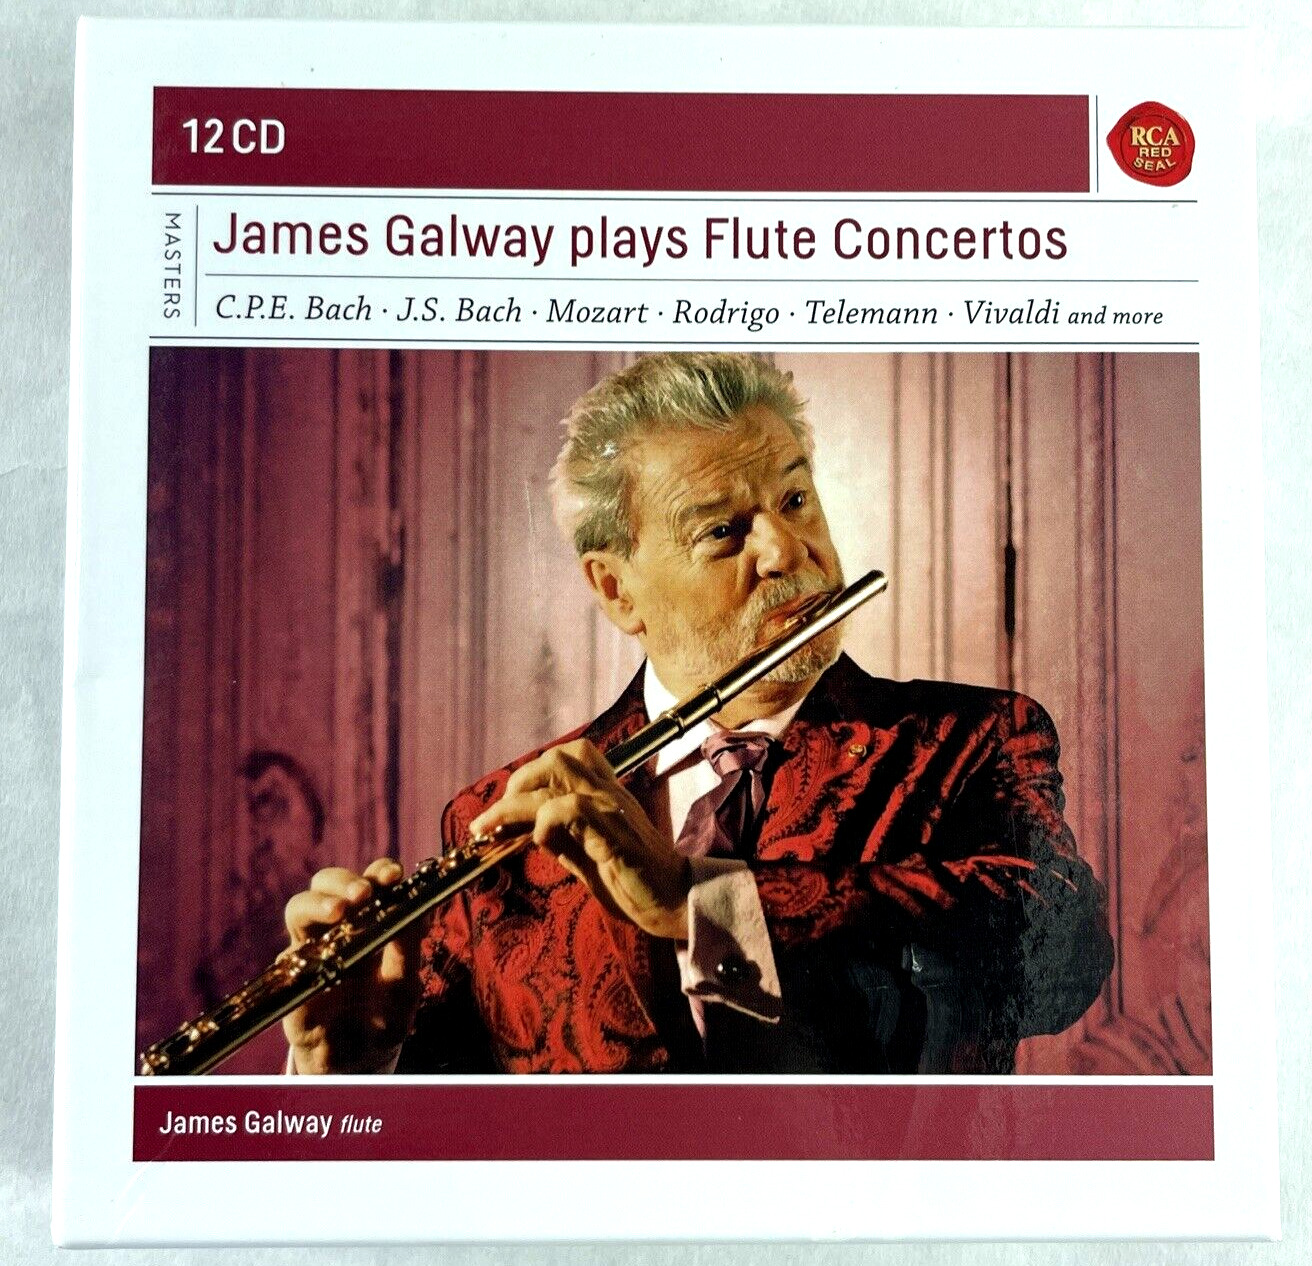 James Galway Plays Flute Concertos 12 CD Set 2011, SONY Classical